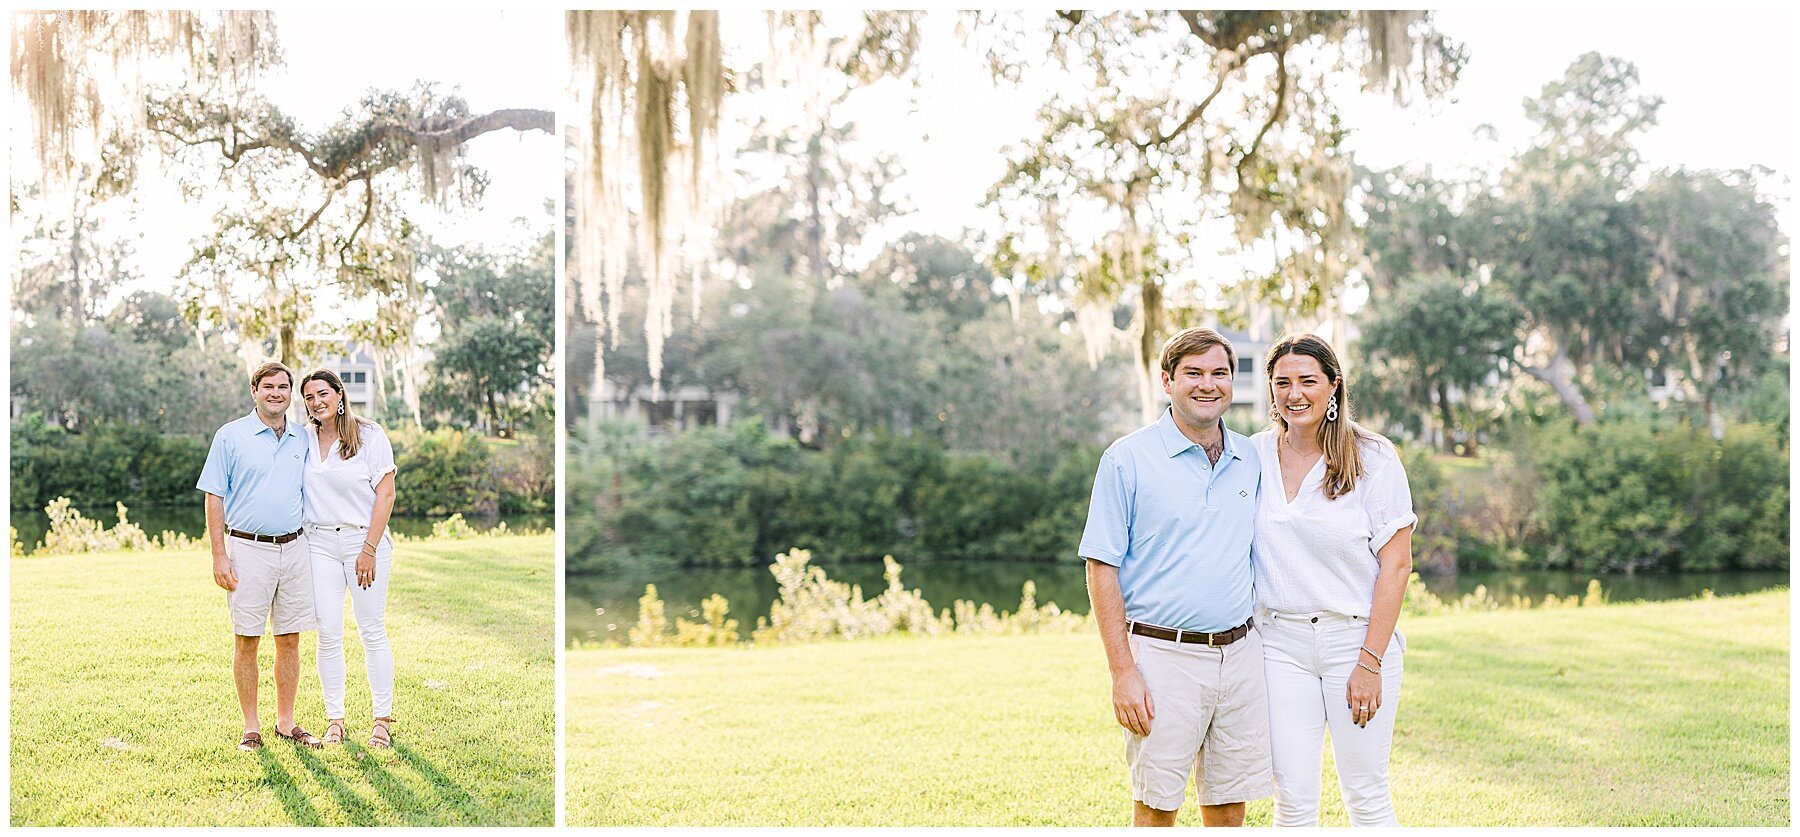 Katherine_Ives_Photography_Montage_Palmetto_Bluff_Oden_Family_9.jpg